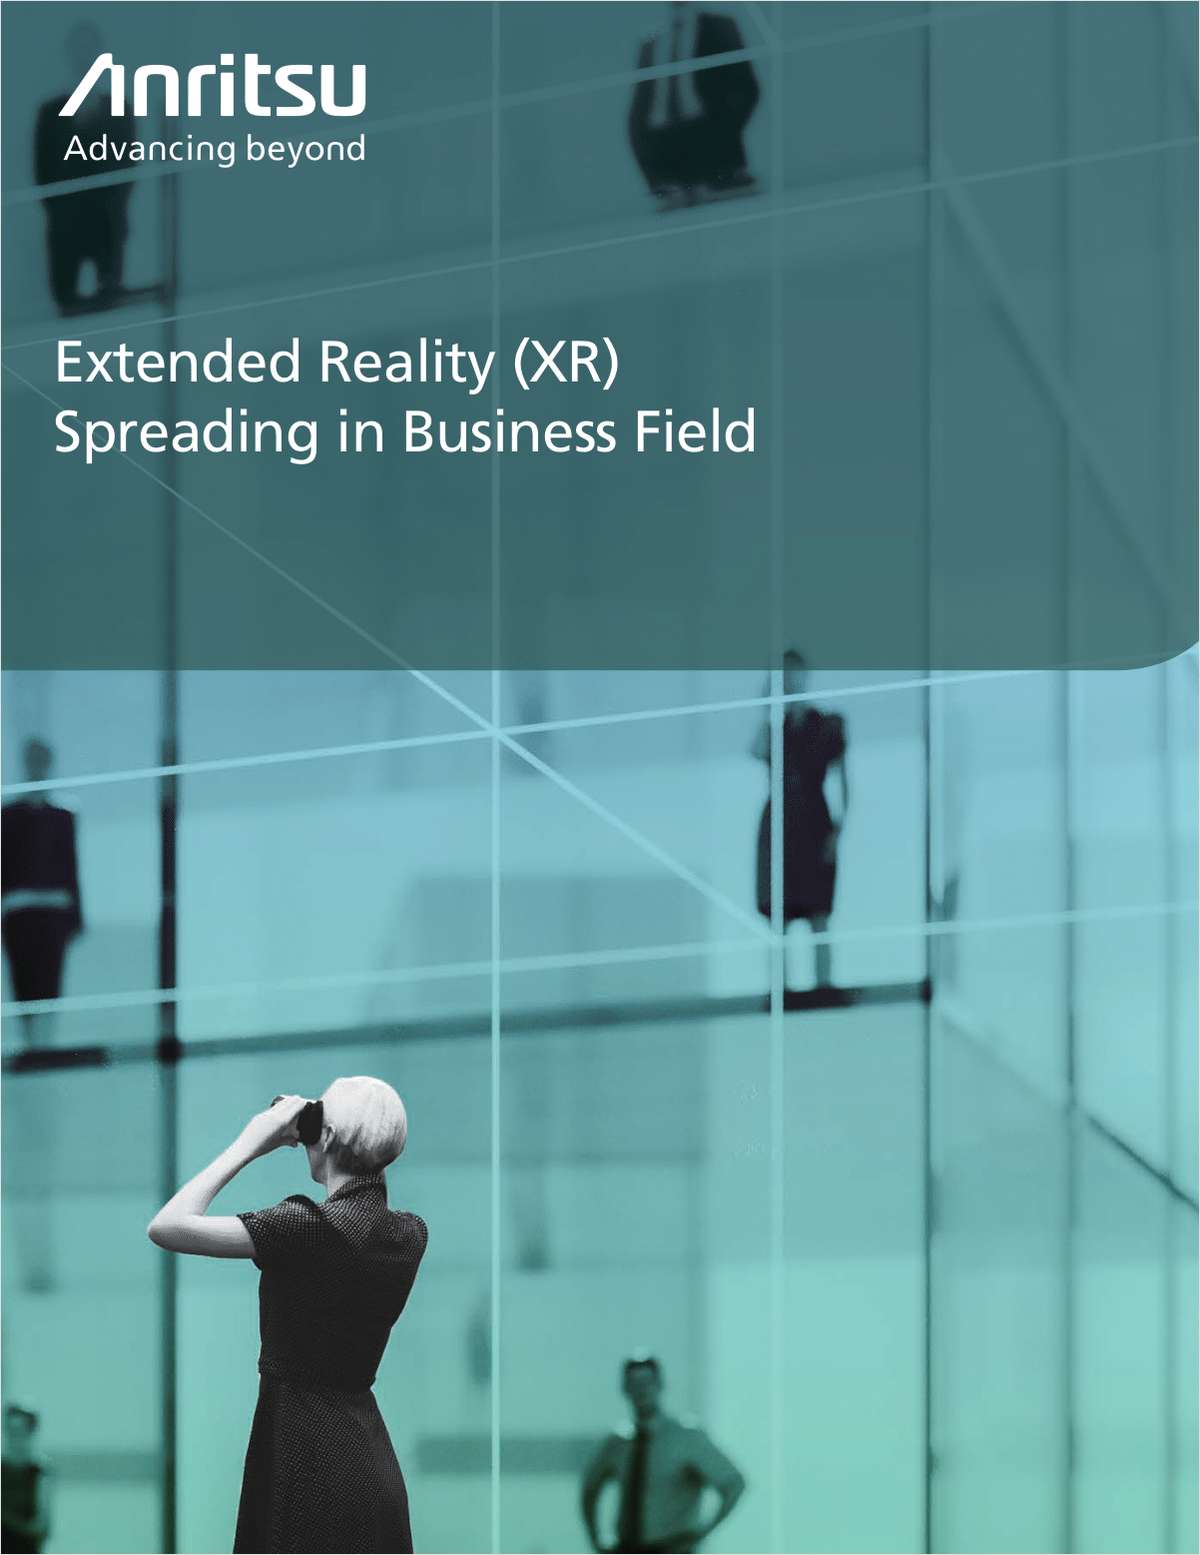 Extended Reality Spreading in the Business Field